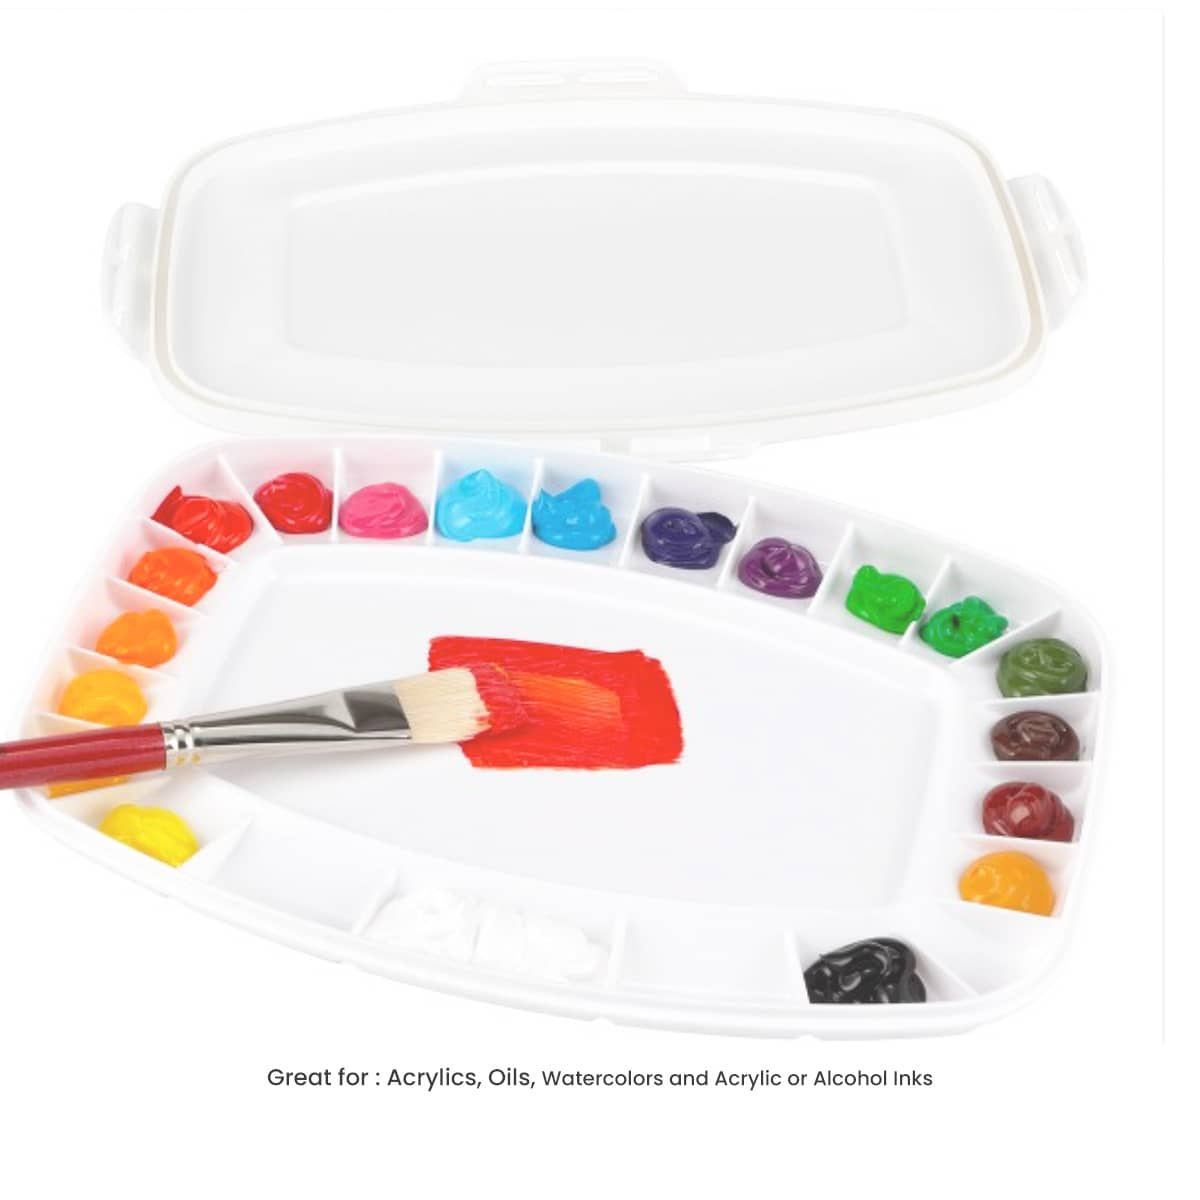 The Perfect Palette for : Oils, Acrylics, Watercolors, Acrylic or Alcohol Inks